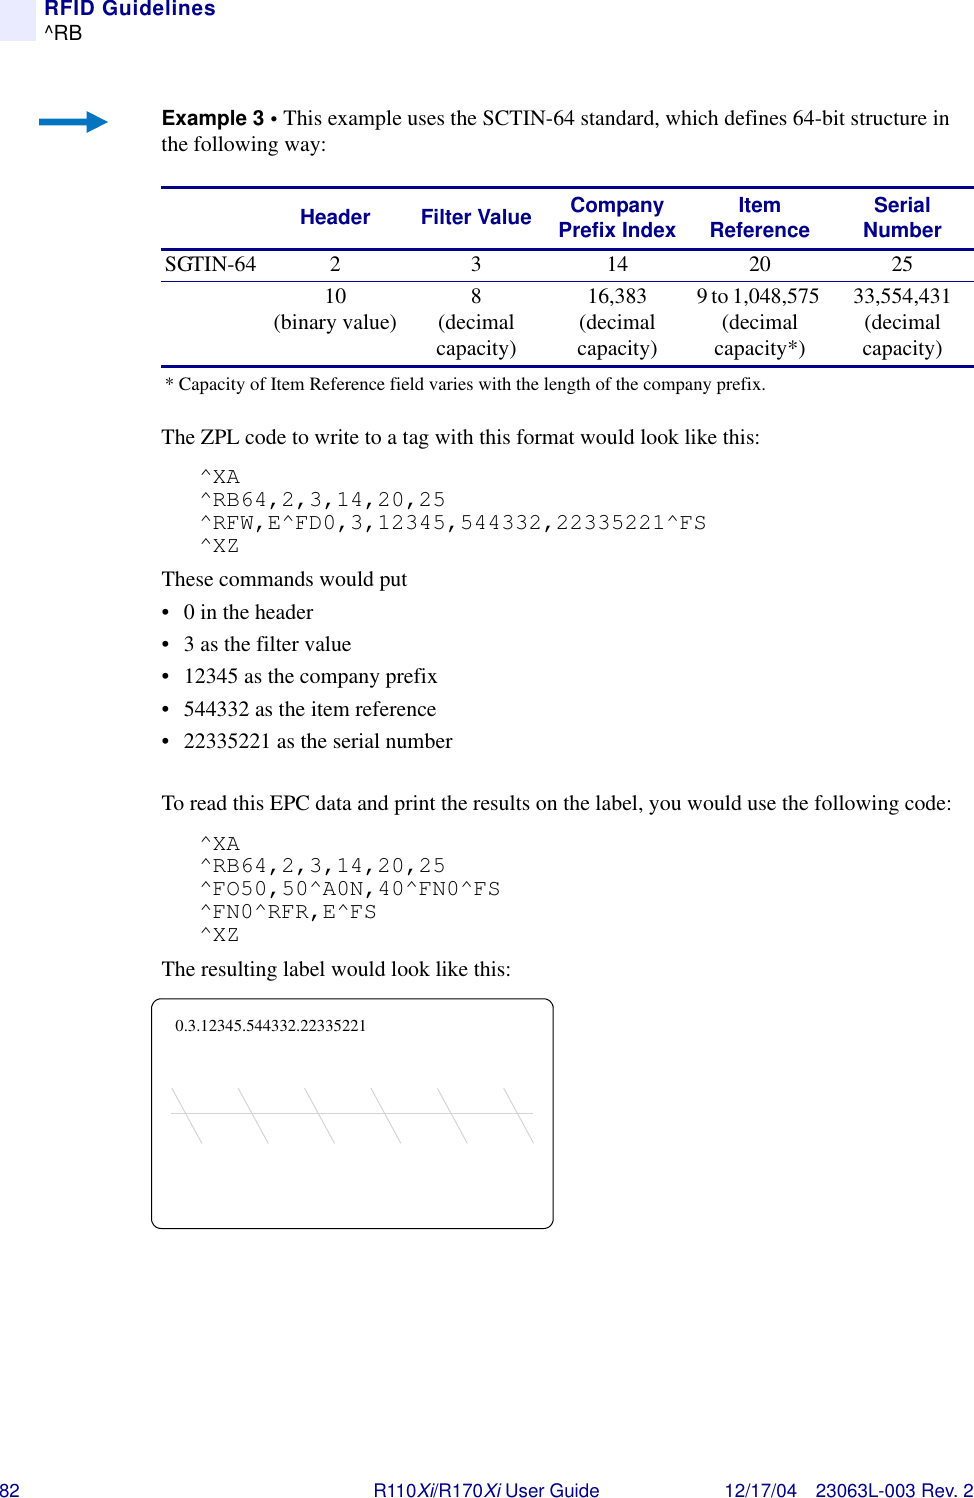 82 R110Xi/R170Xi User Guide 12/17/04 23063L-003 Rev. 2RFID Guidelines^RBExample 3 • This example uses the SCTIN-64 standard, which defines 64-bit structure in the following way:The ZPL code to write to a tag with this format would look like this:^XA^RB64,2,3,14,20,25^RFW,E^FD0,3,12345,544332,22335221^FS^XZThese commands would put• 0 in the header• 3 as the filter value• 12345 as the company prefix• 544332 as the item reference • 22335221 as the serial numberTo read this EPC data and print the results on the label, you would use the following code:^XA^RB64,2,3,14,20,25^FO50,50^A0N,40^FN0^FS^FN0^RFR,E^FS^XZThe resulting label would look like this:Header Filter Value Company Prefix Index Item Reference Serial NumberSGTIN-64 2 3 14 20 2510 (binary value) 8 (decimal capacity)16,383(decimal capacity)9 to 1,048,575 (decimal capacity*)33,554,431 (decimal capacity)* Capacity of Item Reference field varies with the length of the company prefix.0.3.12345.544332.22335221